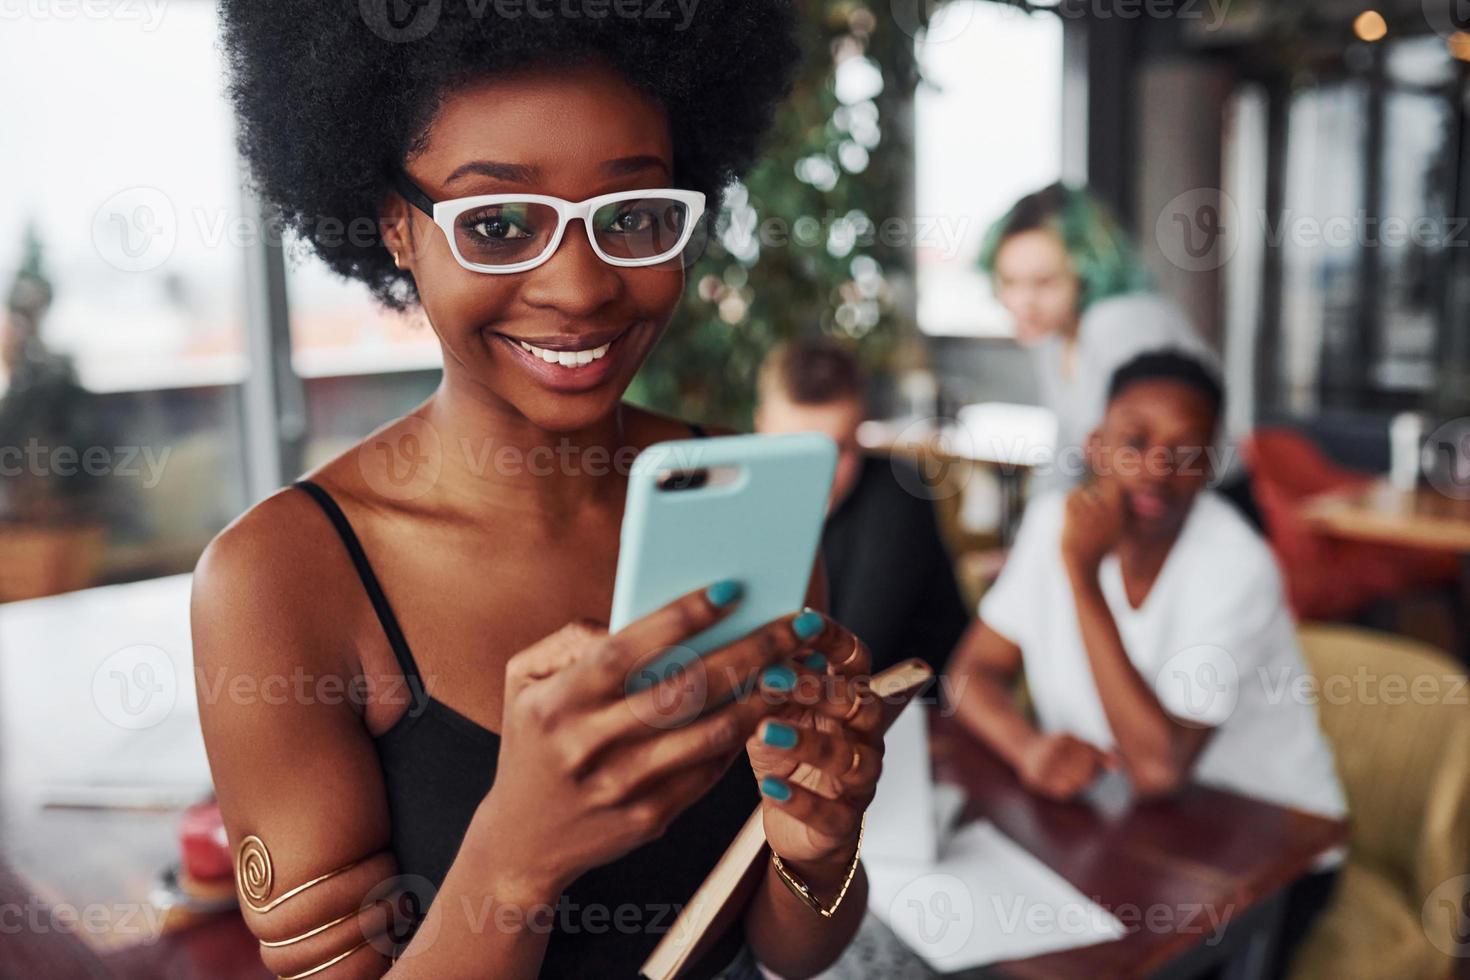 Black woman standing in front of group of multi ethnic people with alternative girl with green hair is working together by the table indoors photo